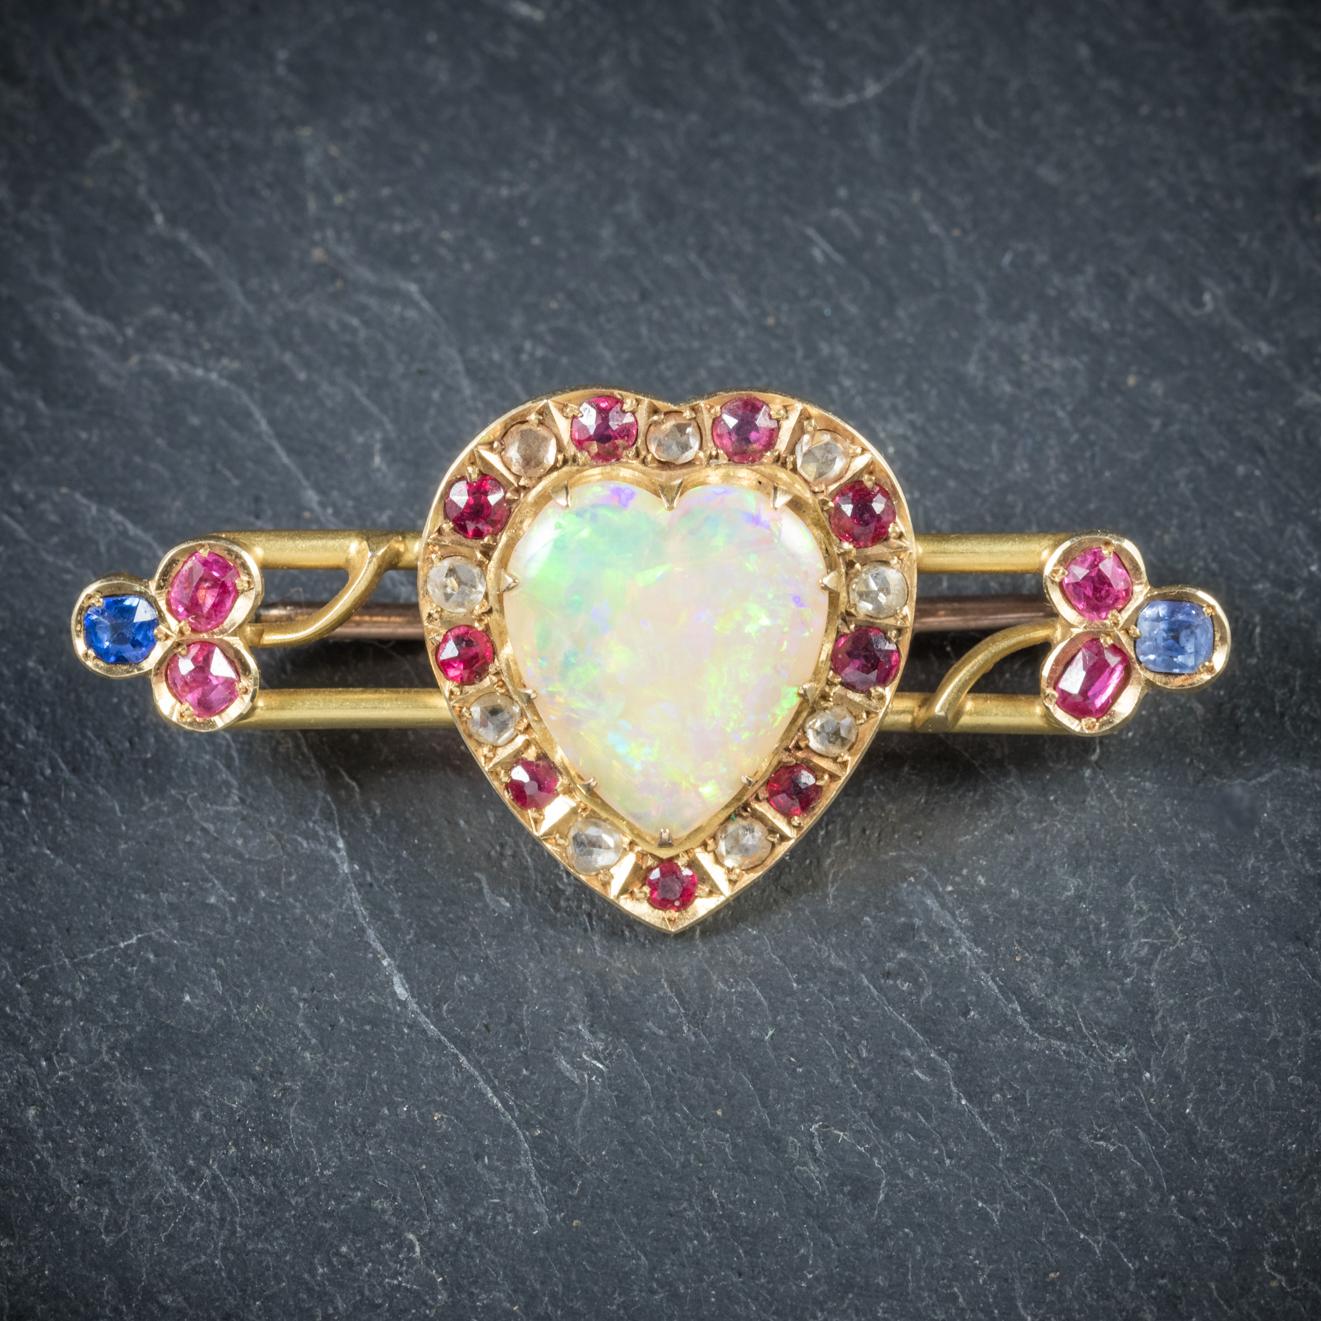 This beautiful antique Gemstone heart brooch is Victorian Circa 1900

The brooch is adorned with a pretty 6ct heart shaped Opal in the centre and surrounded by Rubies and Diamonds

The brooch stems out and leads to two small shamrocks at each end